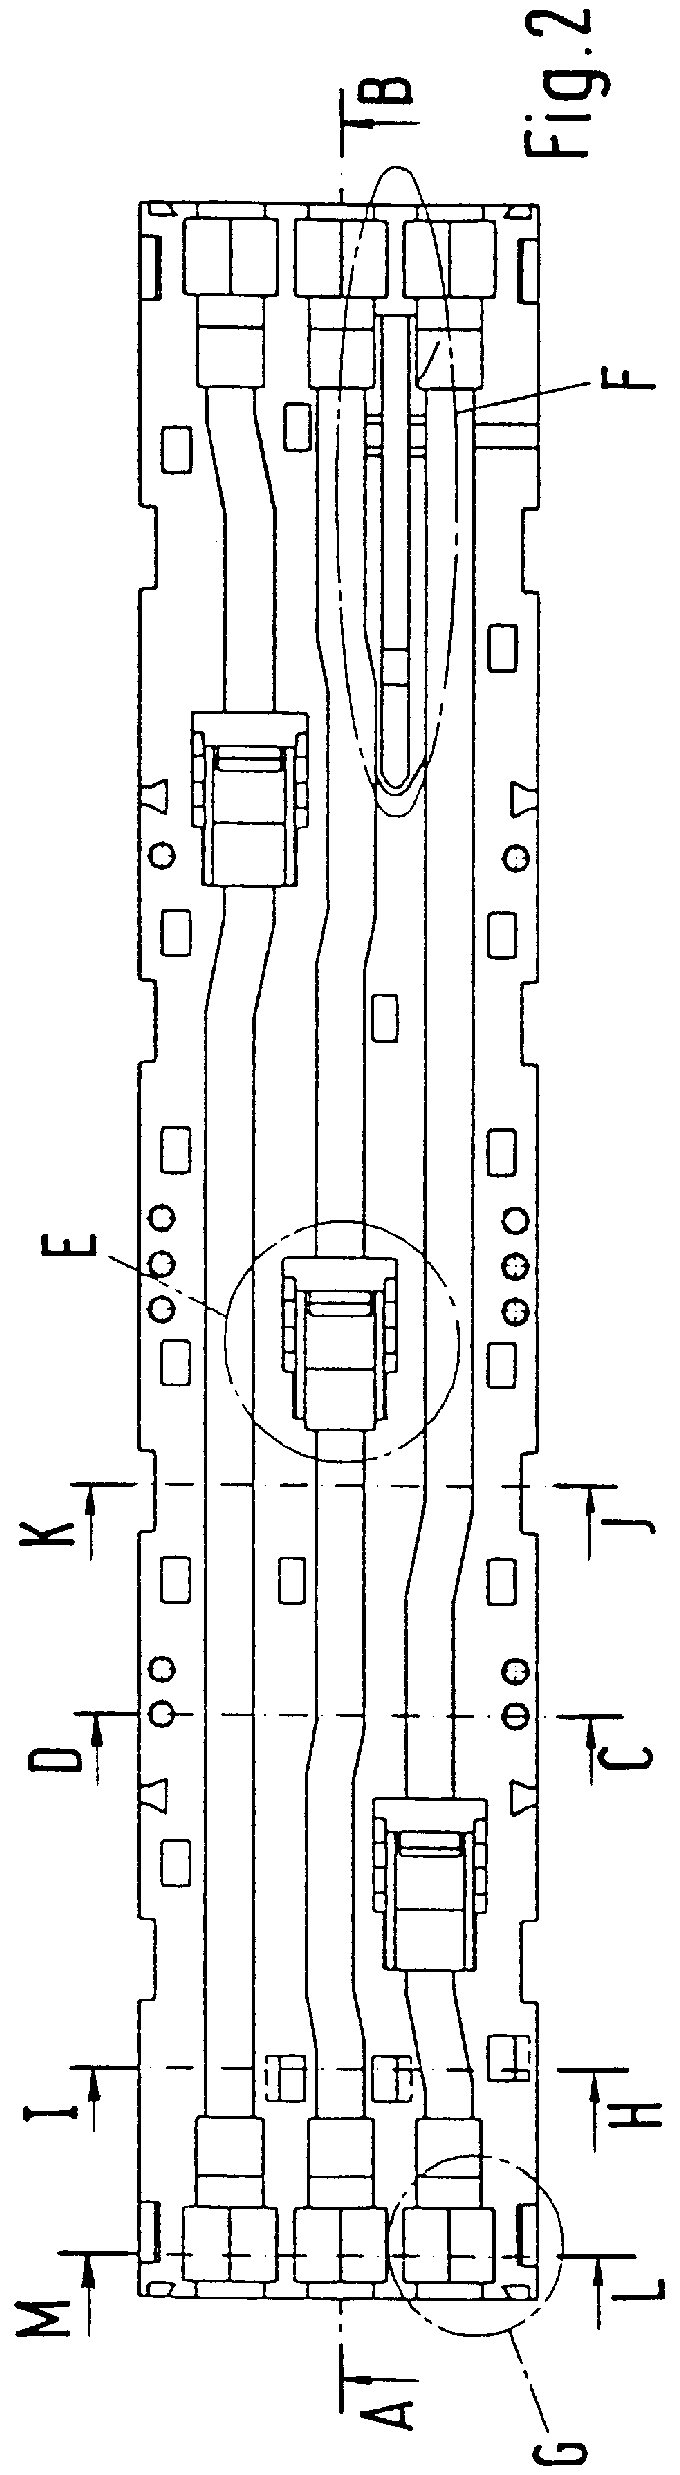 Multi-function adapter for a number of bus bars of a bus bar system